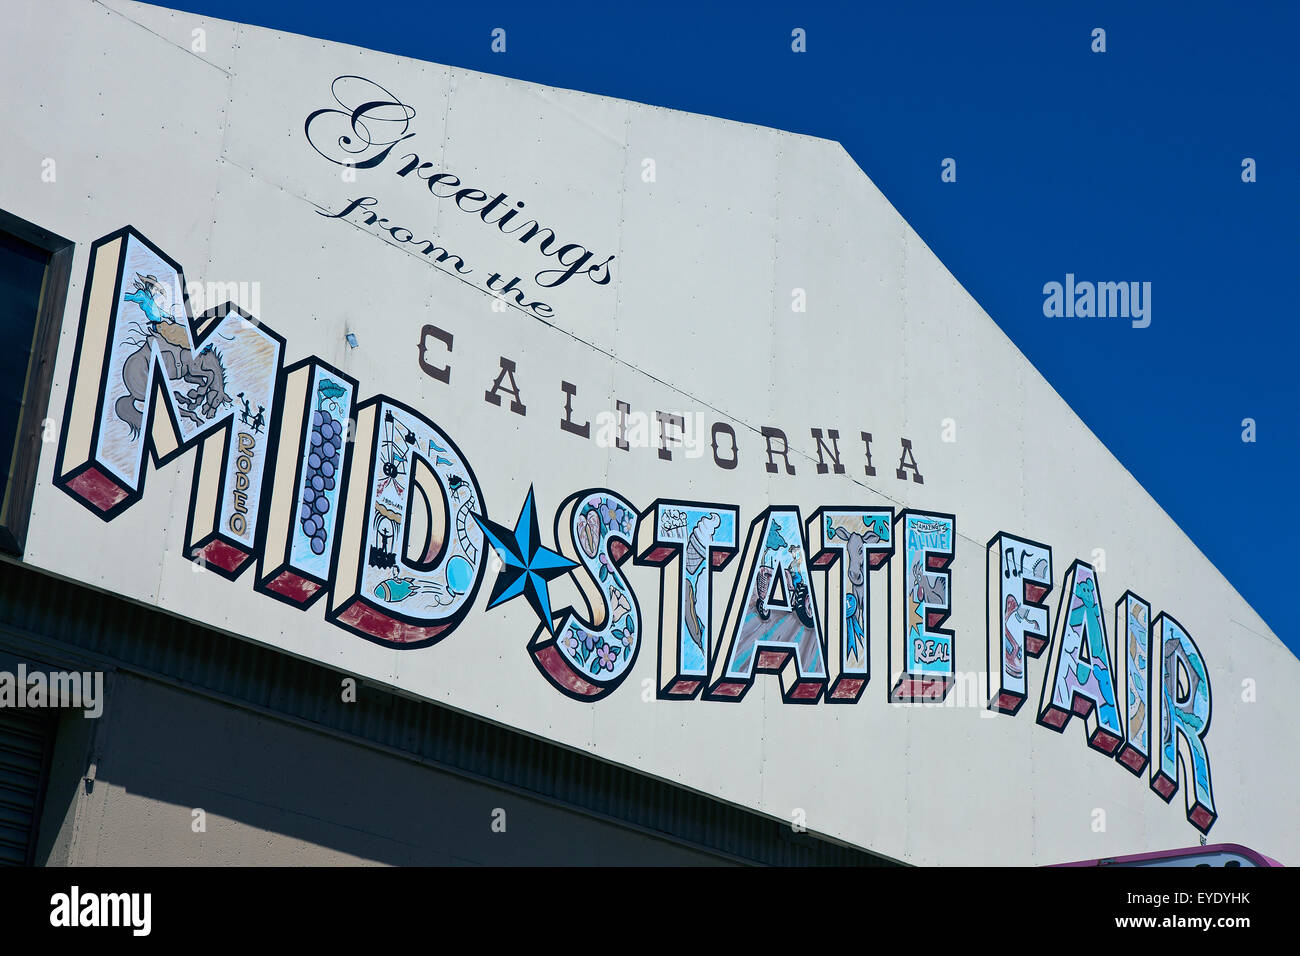 Sign with welcome to California Mid State Fair, Paso Robles, California, United States of America Stock Photo